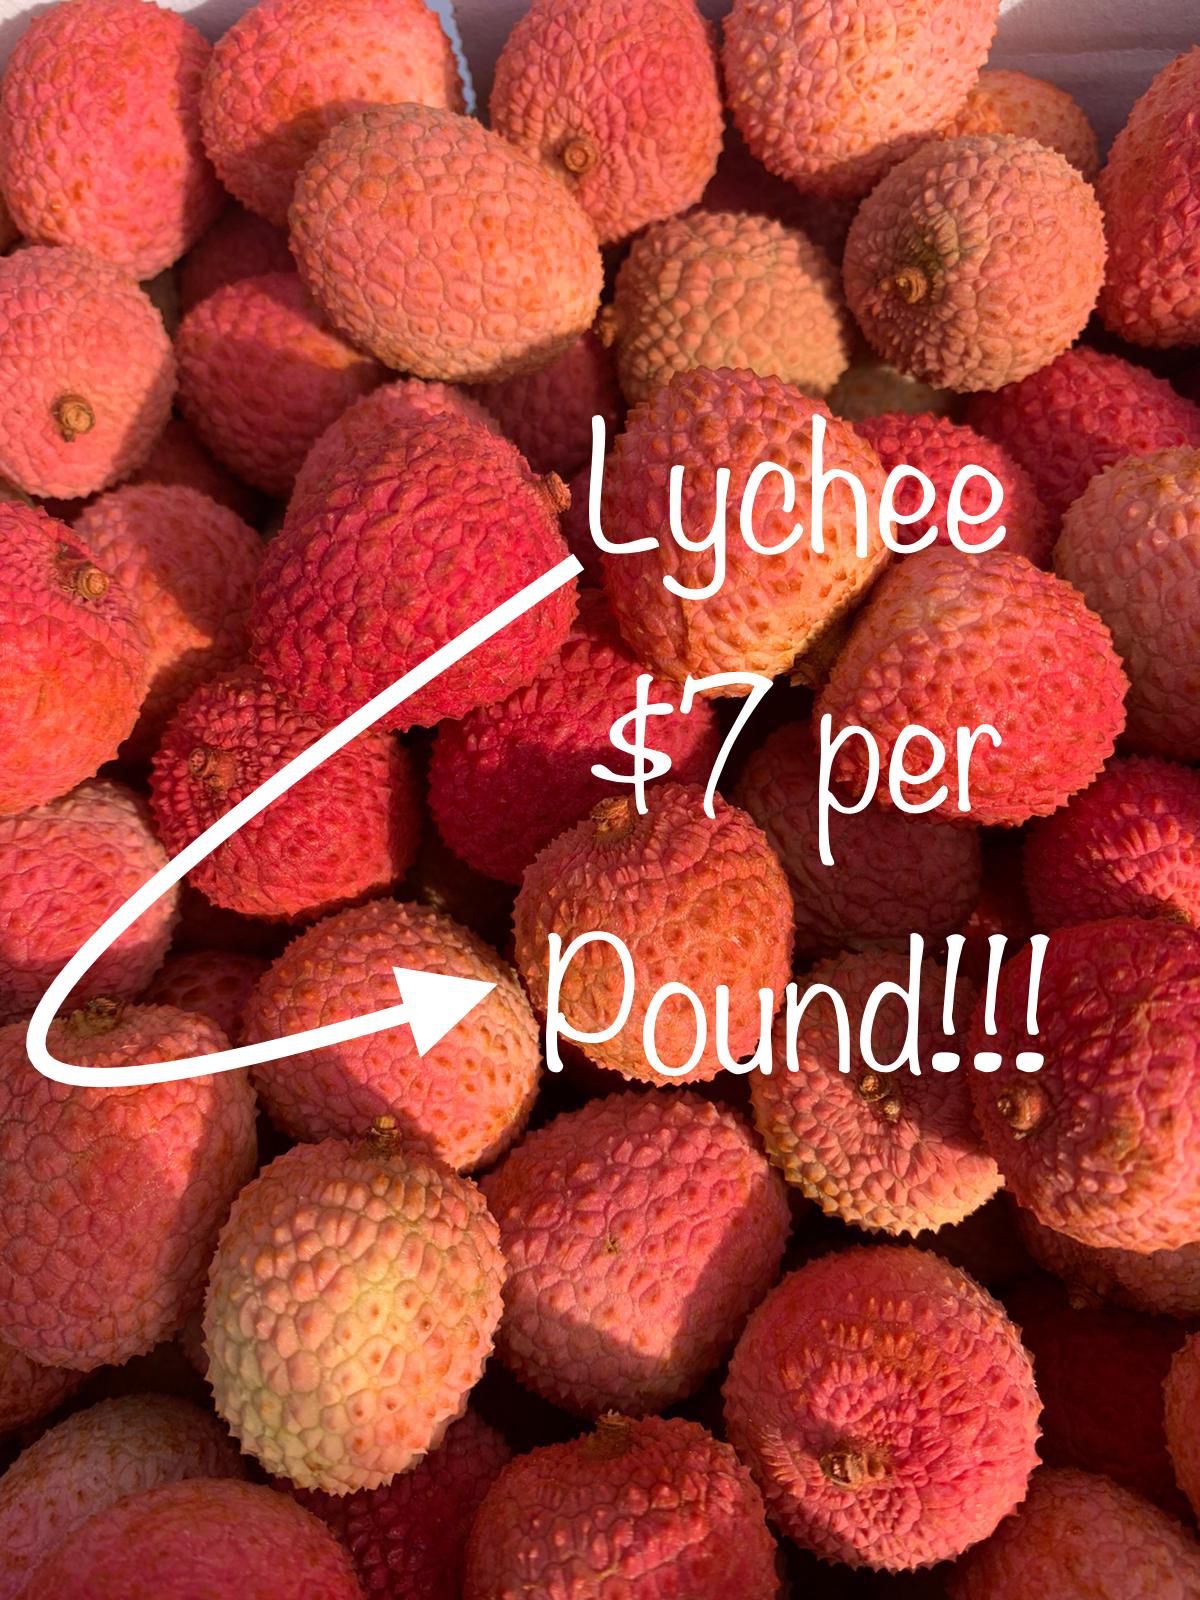 Lychee - Ready to Eat - $7 and Free Local Delivery